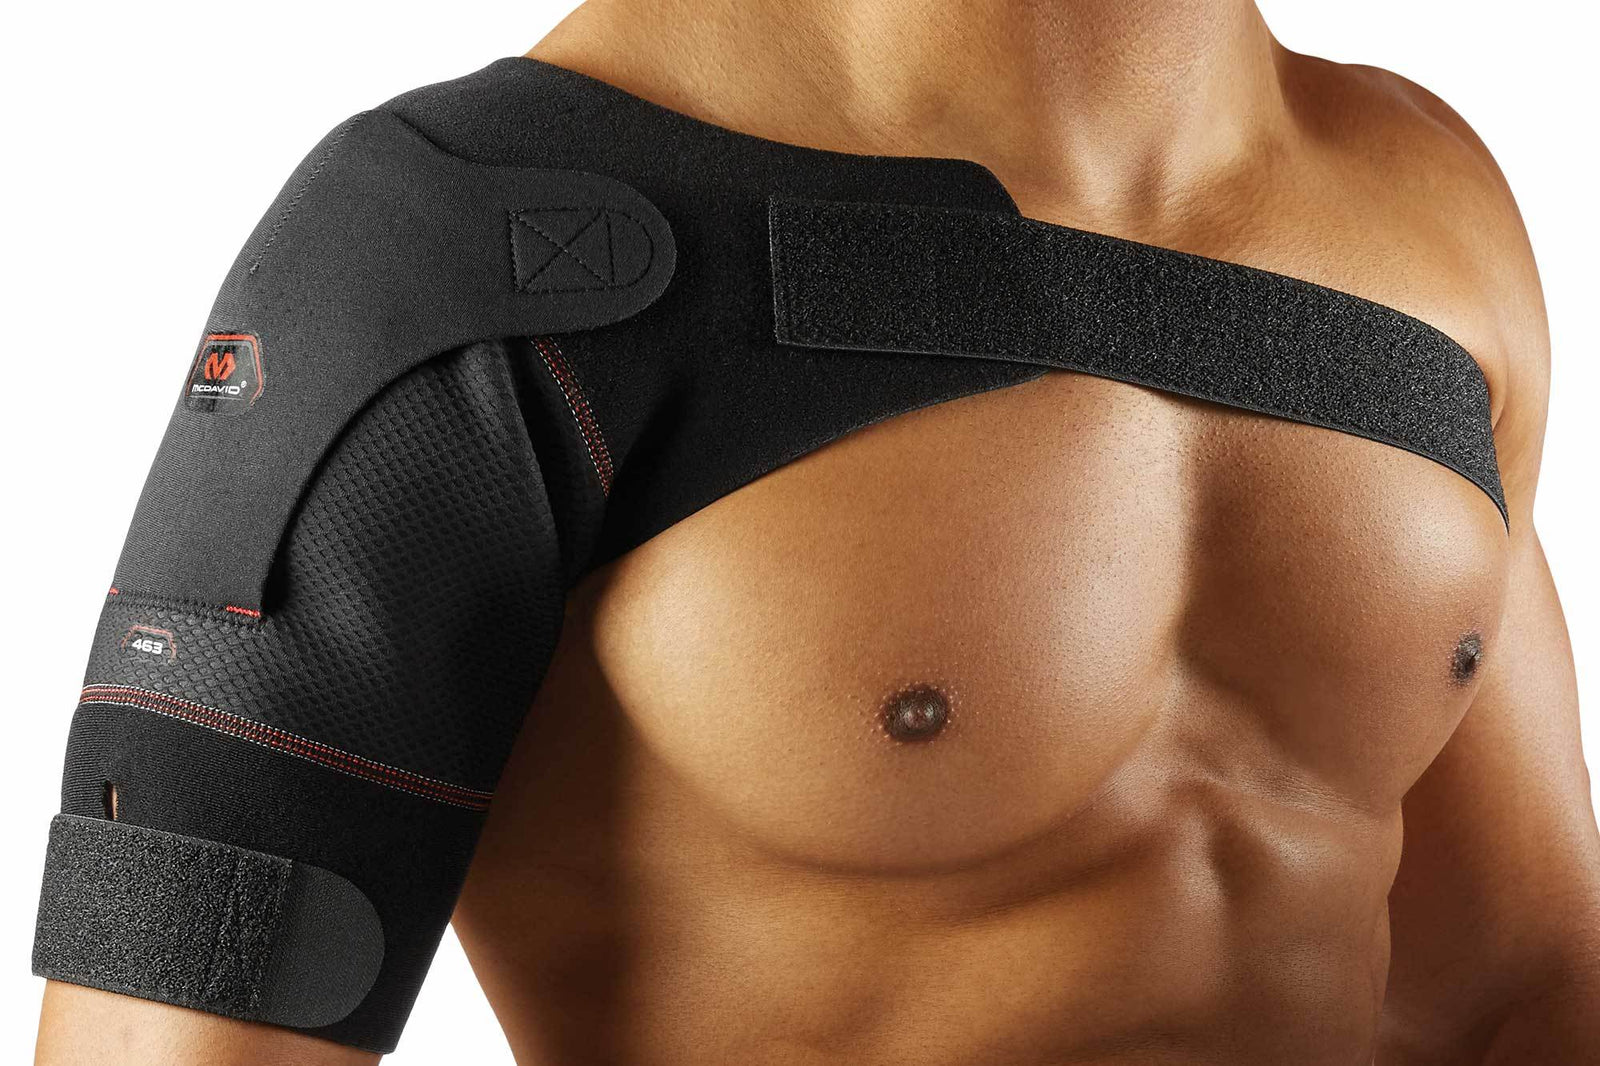 Shoulder Braces for Support & Pain Relief